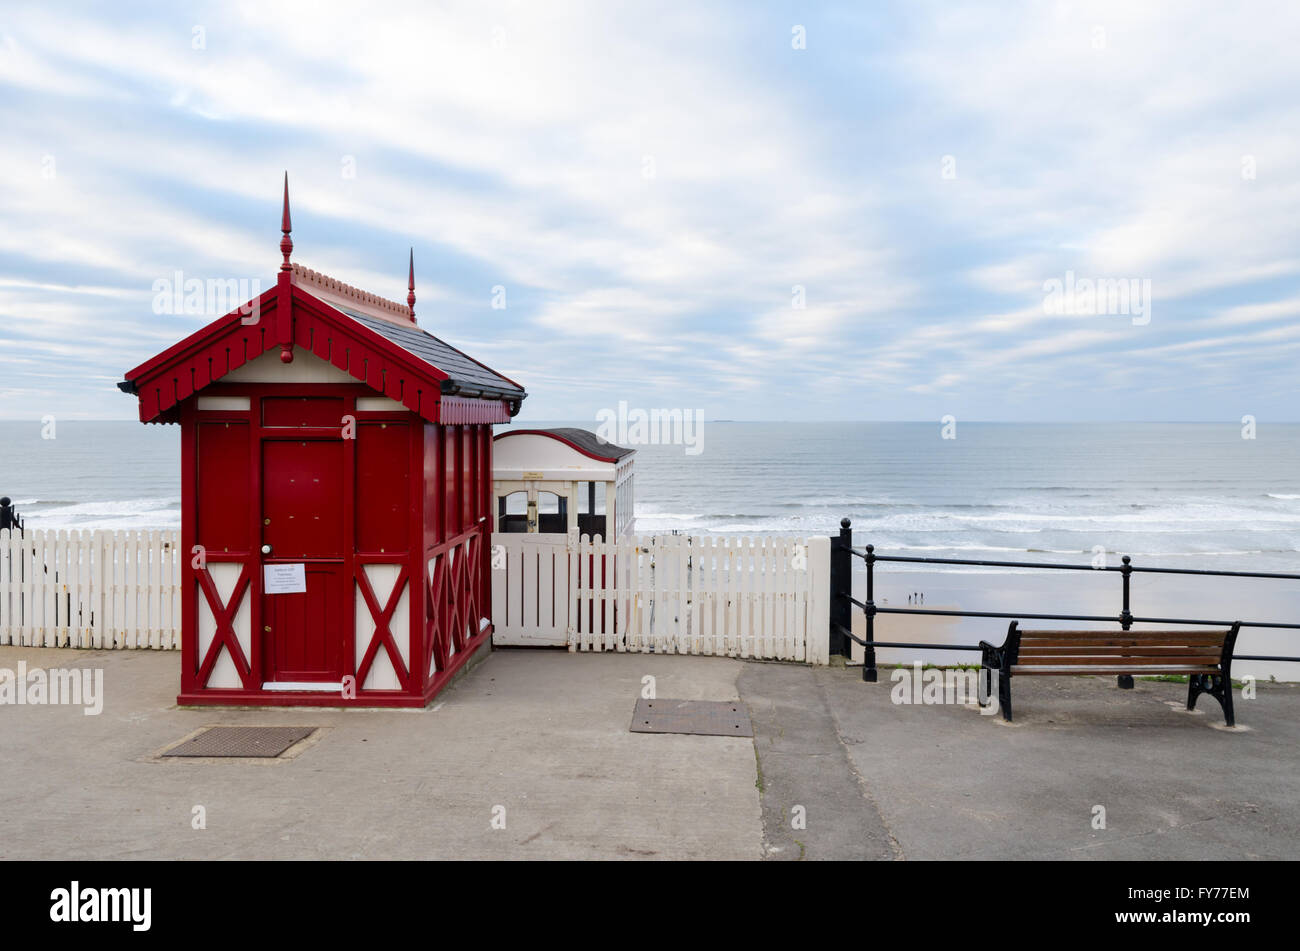 Saltburn Cliff Lift at Saltburn-by-the-Sea Stock Photo